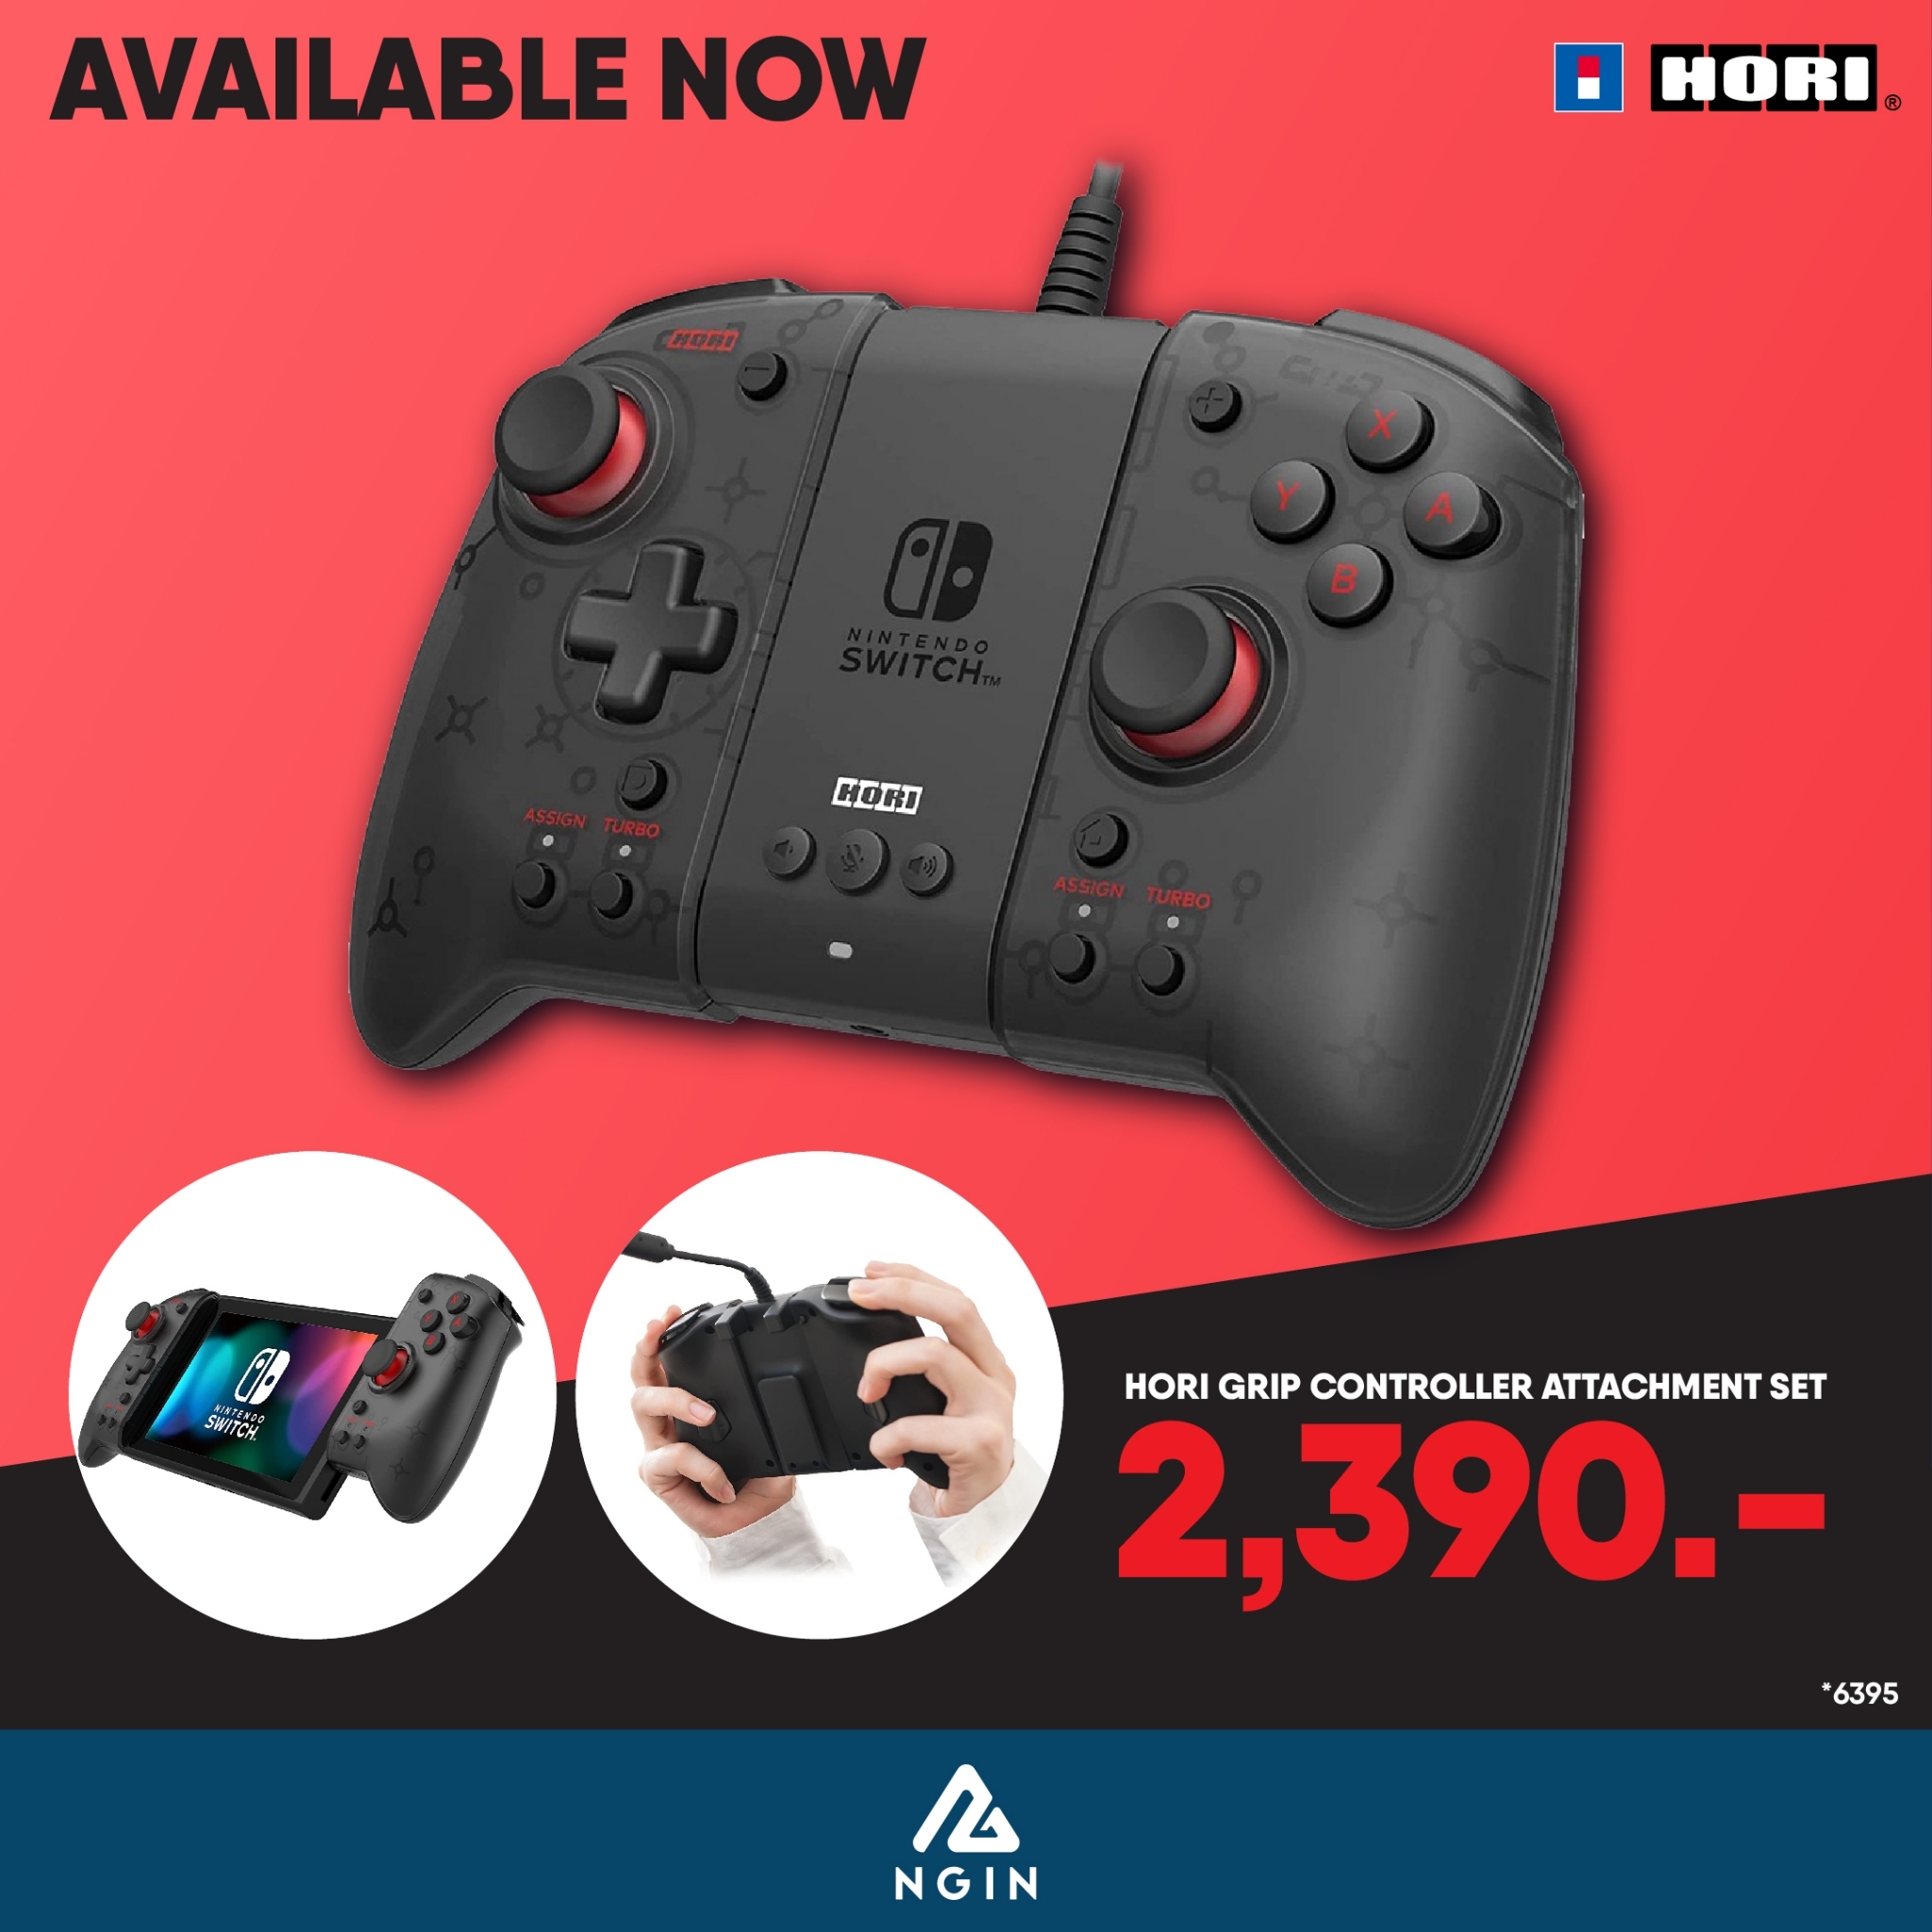 ACC: HORI GRIP CONTROLLER ATTACHMENT SET FOR NSW/PC